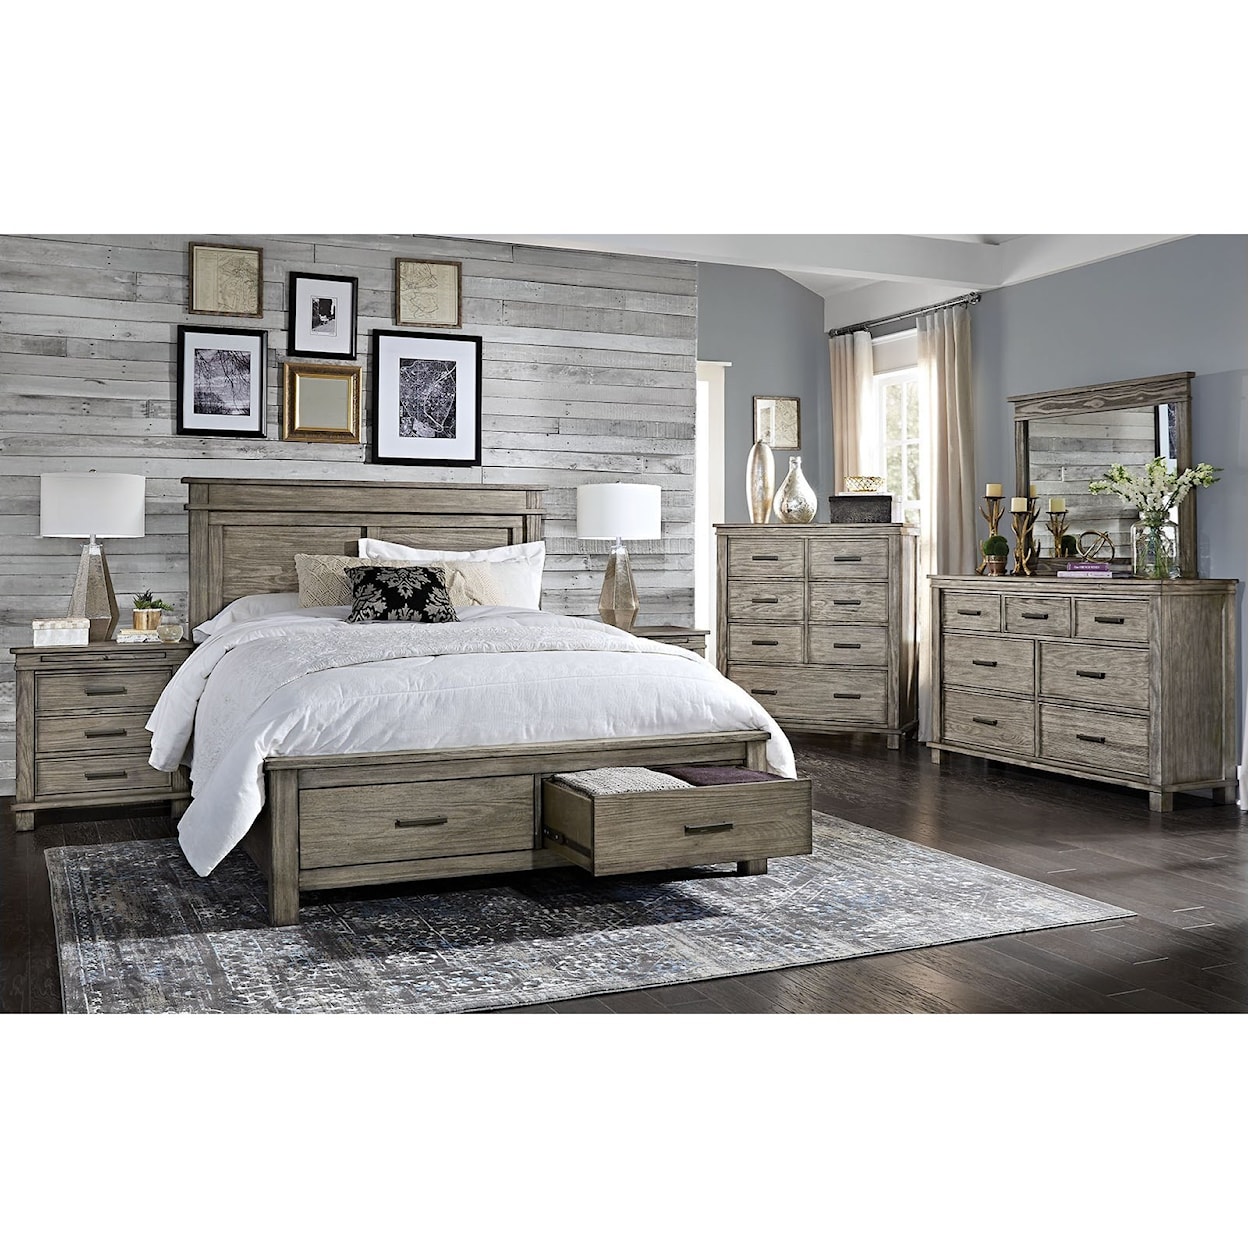 A-A Glacier Point King Storage Bedroom Group